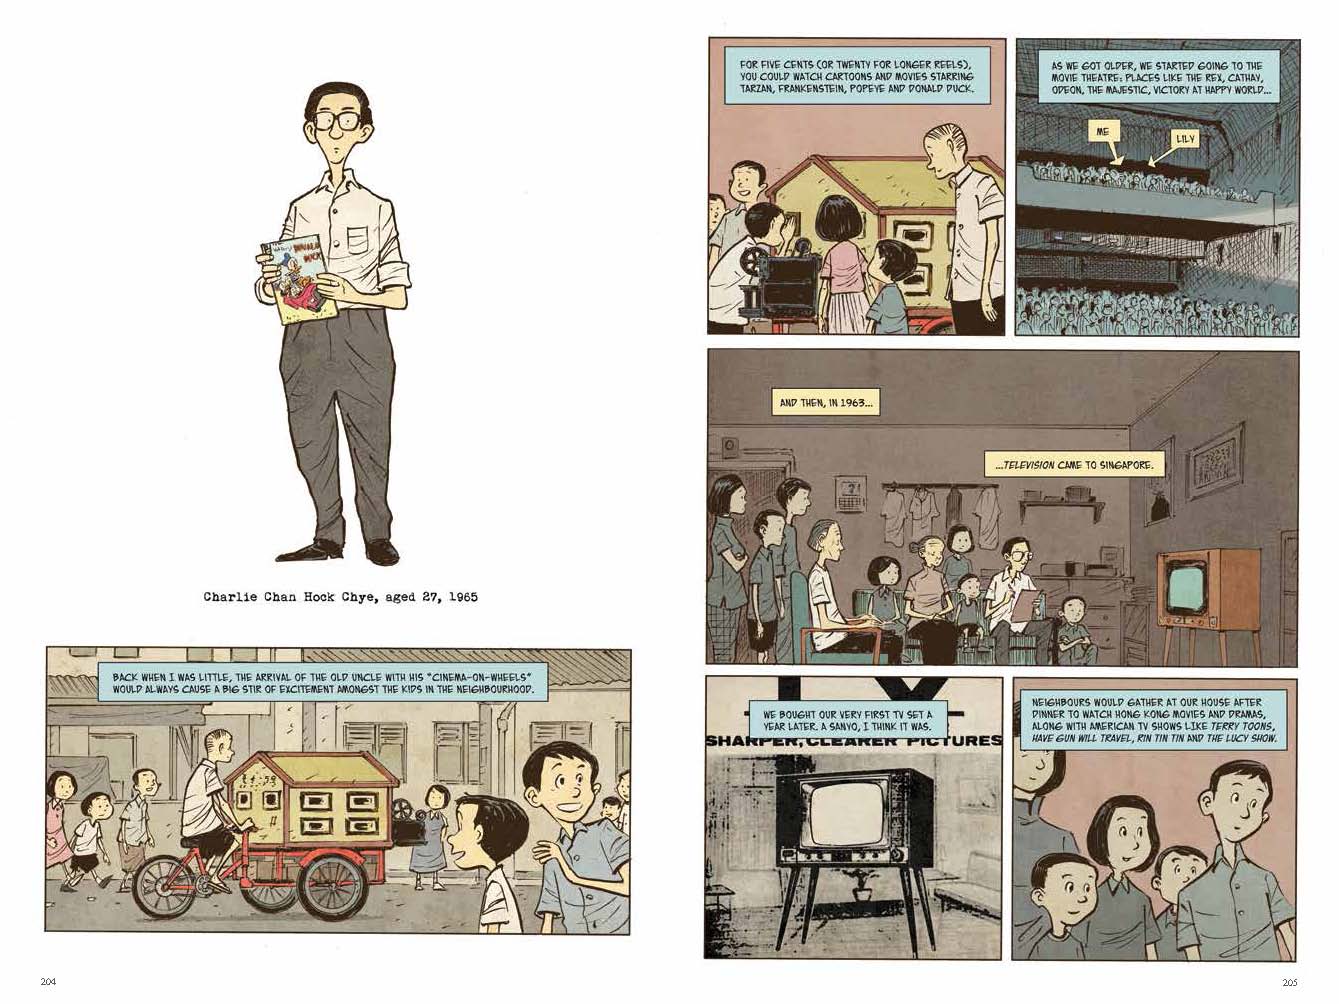 Controversial comic on Singapore's history wins big - CNN Style